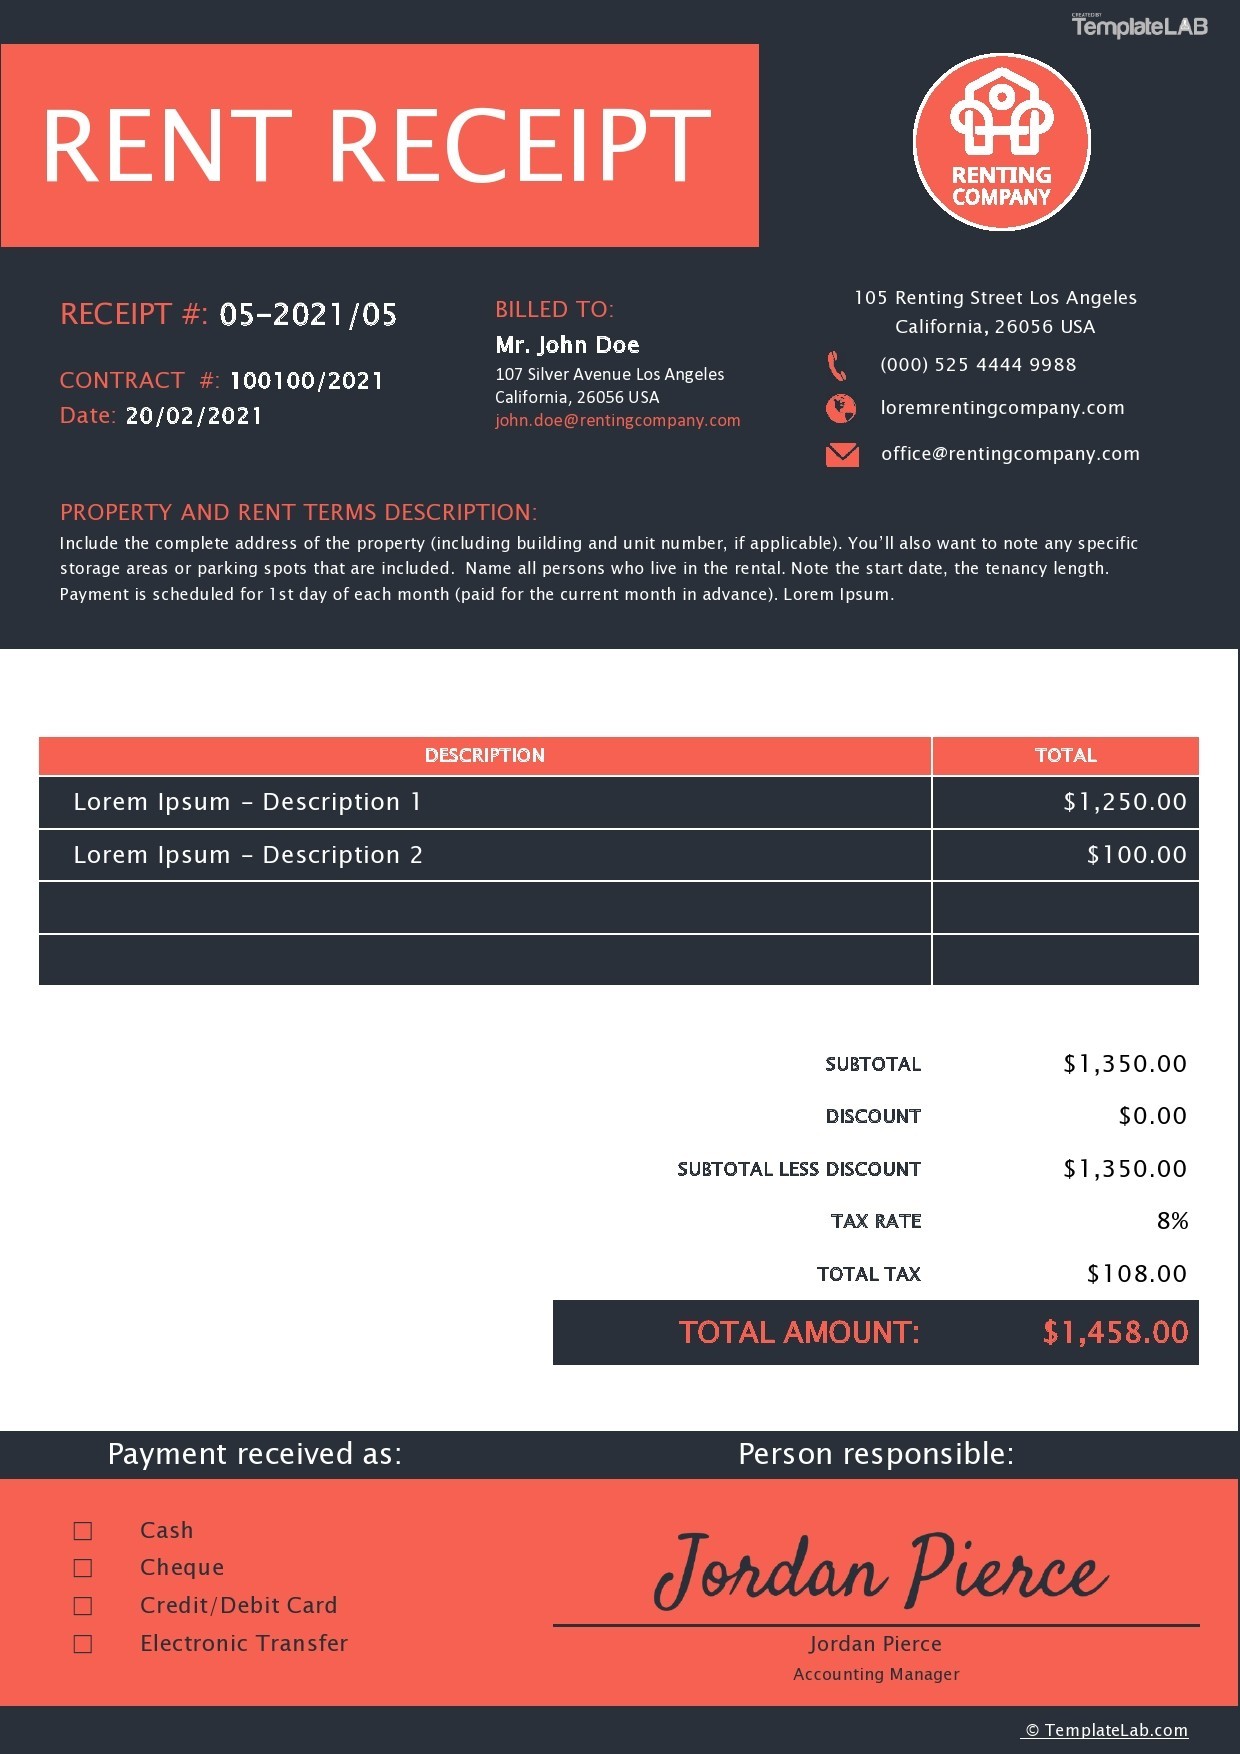 30-editable-purchase-receipt-templates-word-excel-templatelab